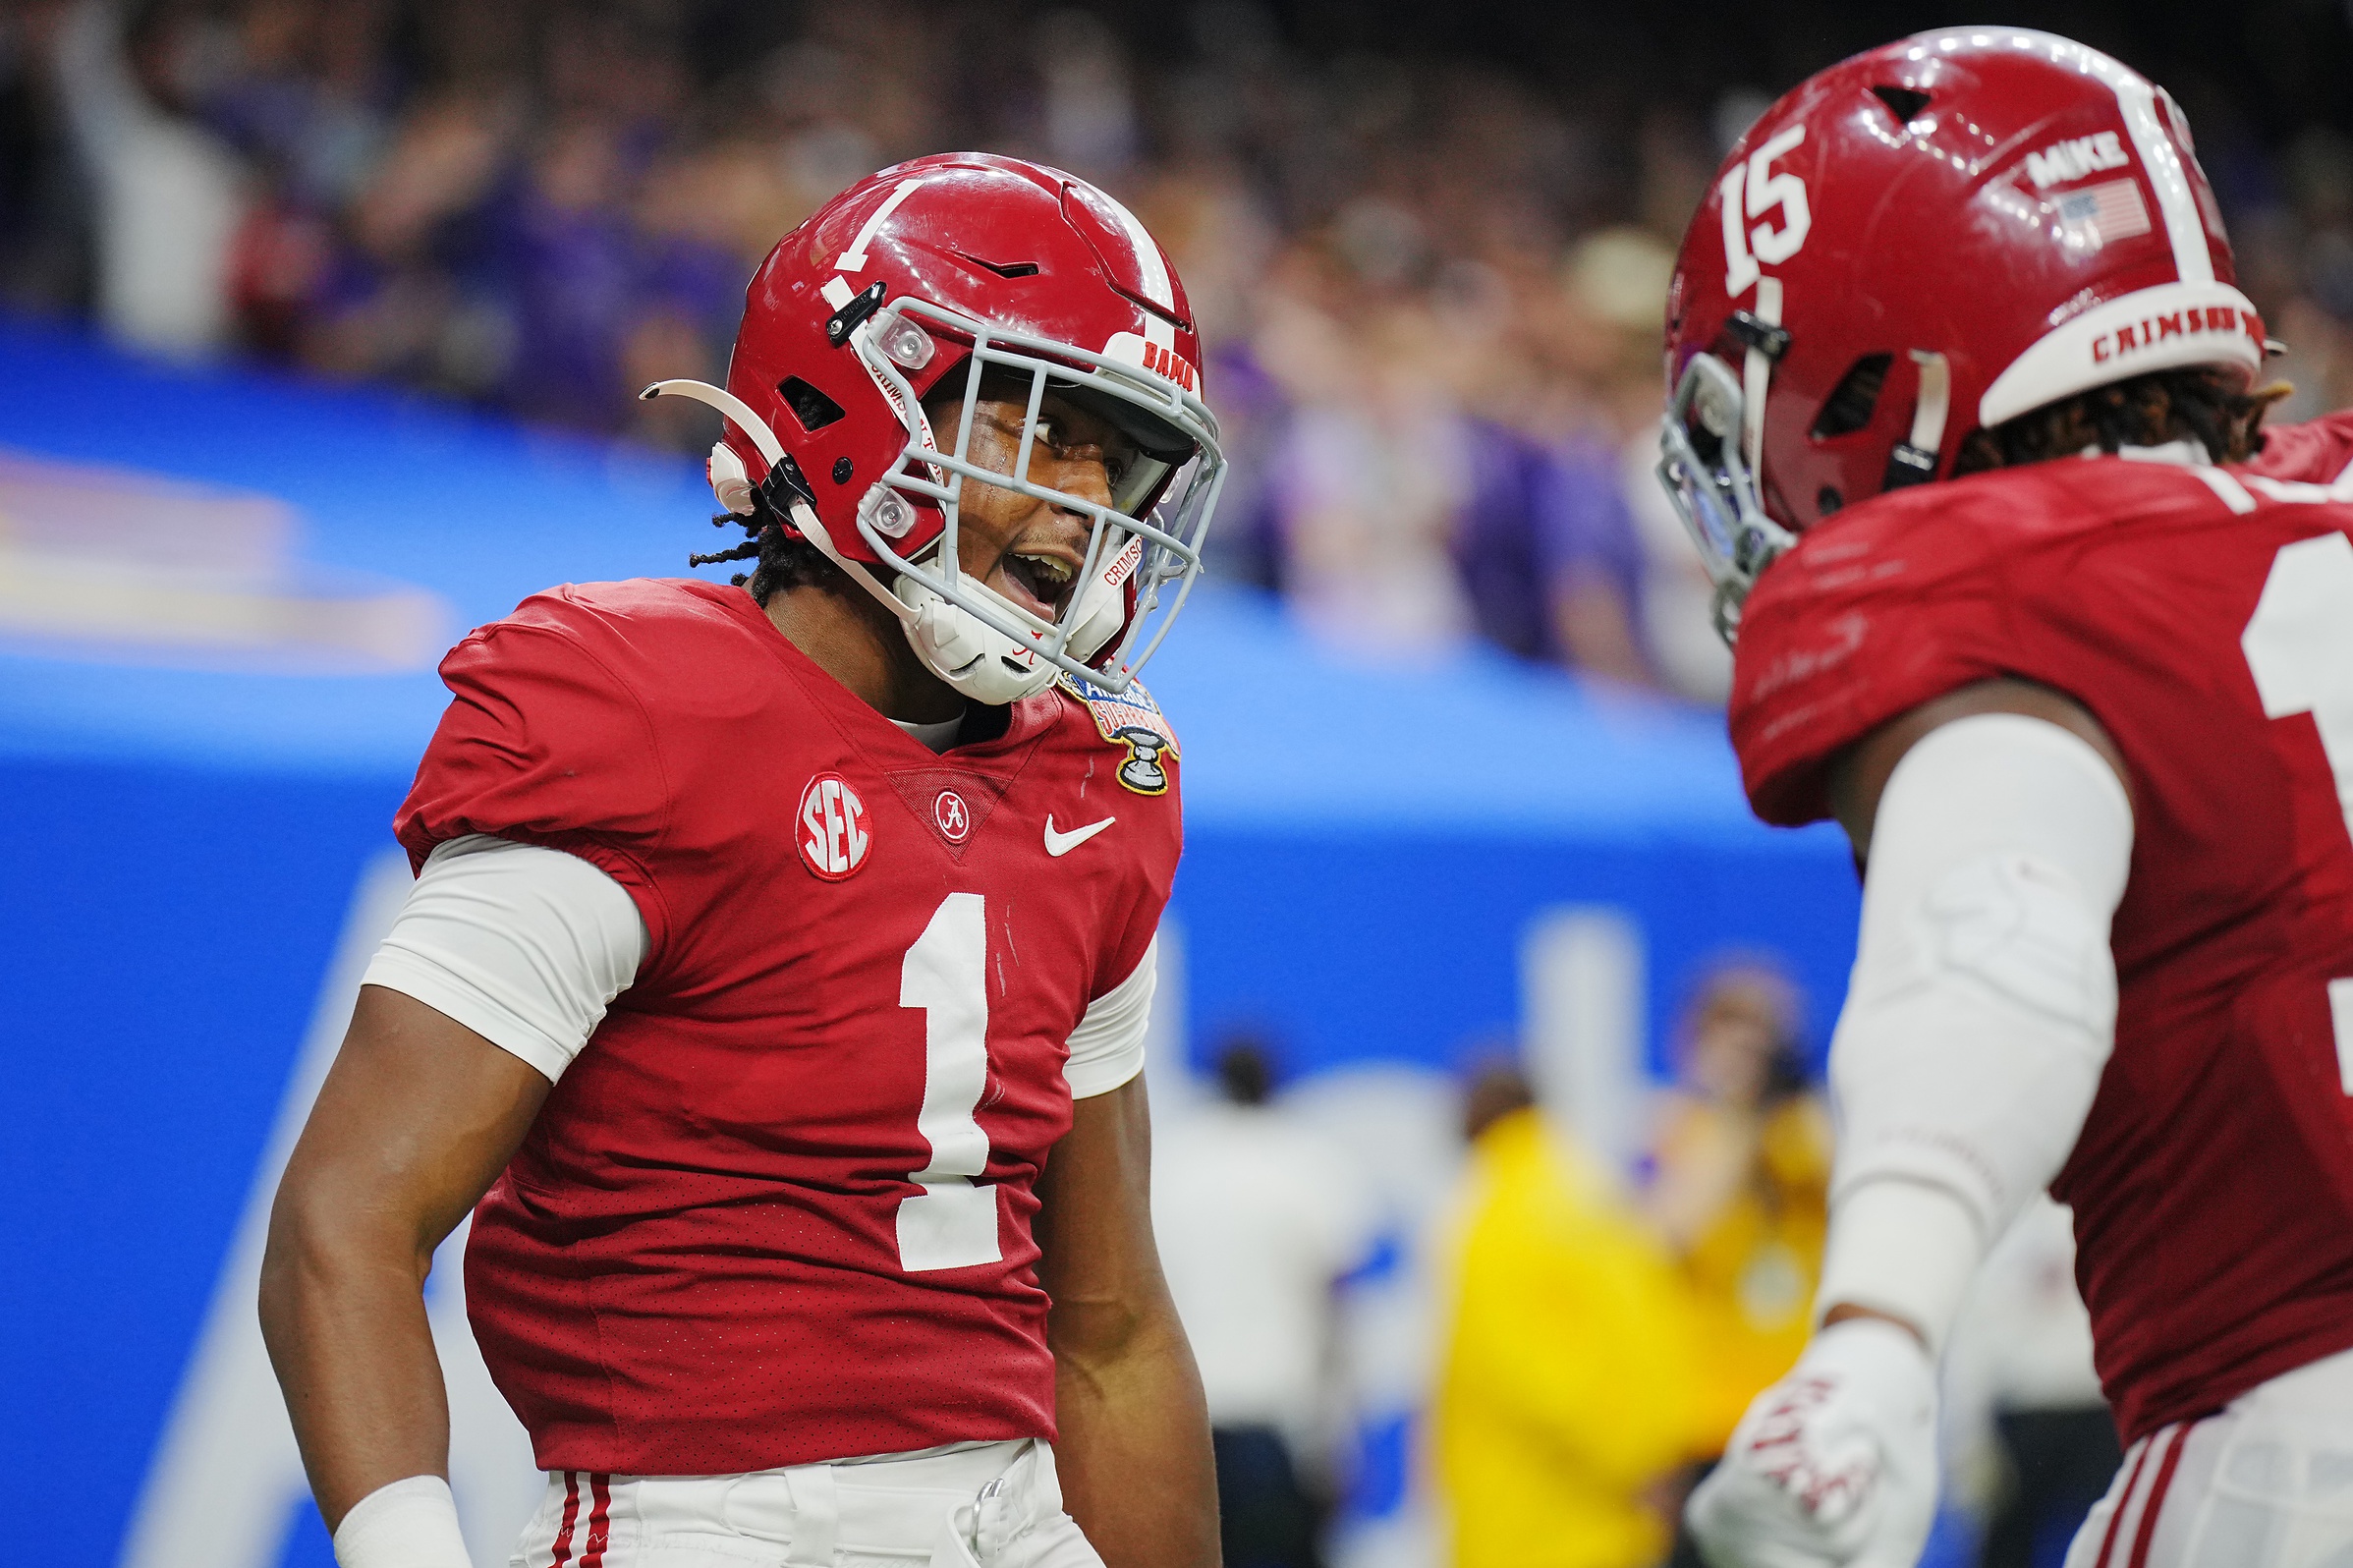 A thorough examination of the top five returning defensive backs in the SEC and the attributes that differentiate them.